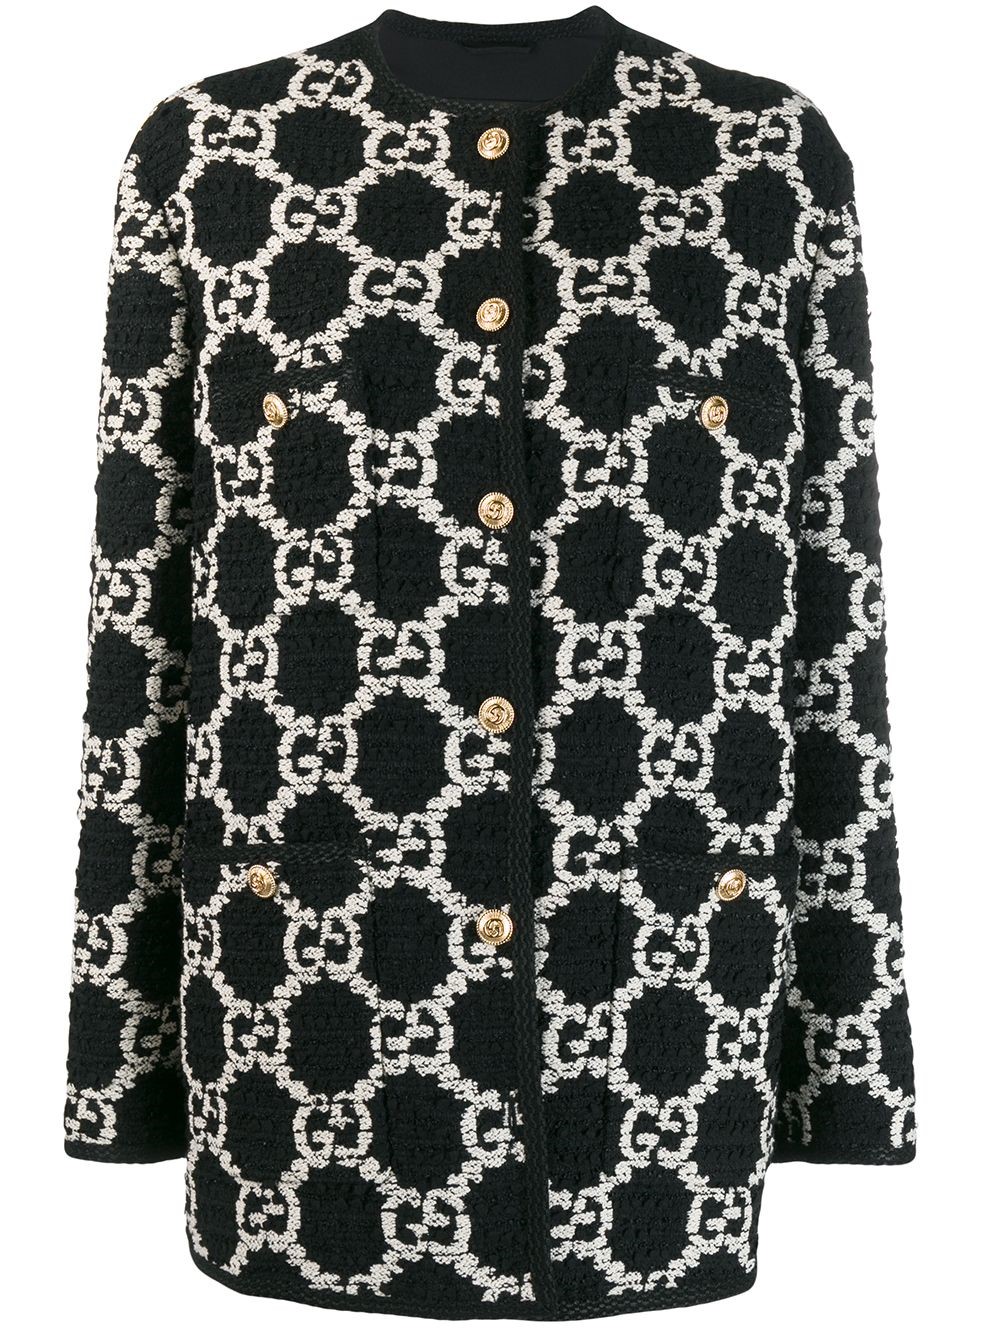 gucci GG PRINT CARDIGAN available on 